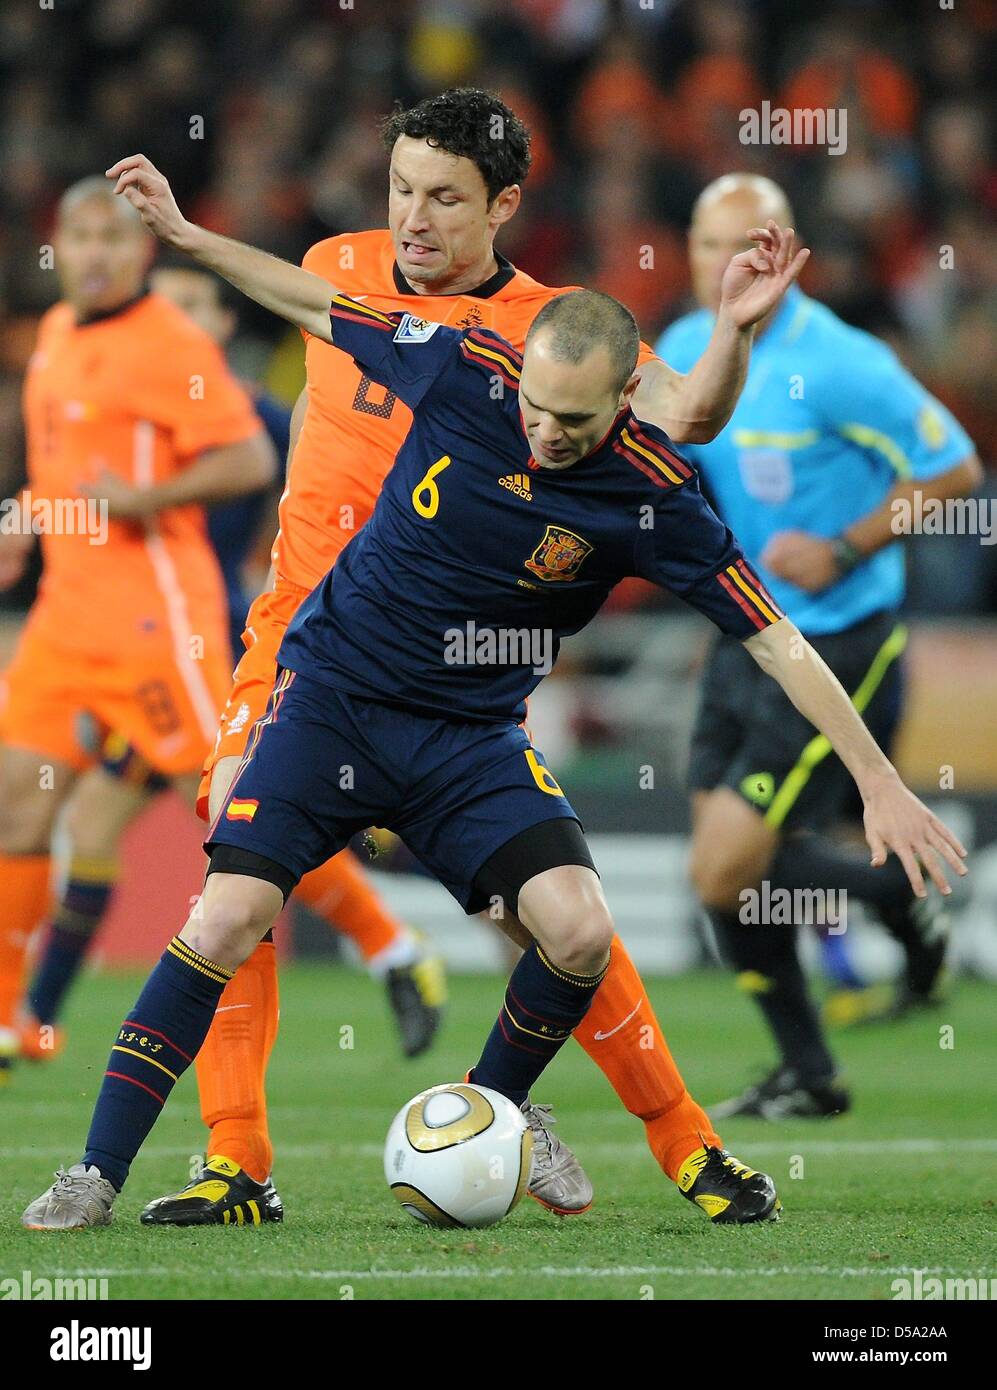 Spain's Andres Iniesta (R) vies for the ball with Netherland's Mark van Bommel during the 2010 FIFA World Cup final match between the Netherlands and Spain at Soccer City Stadium in Johannesburg, South Africa 11 July 2010. Photo: Marcus Brandt dpa - Please refer to http://dpaq.de/FIFA-WM2010-TC  +++(c) dpa - Bildfunk+++ Stock Photo